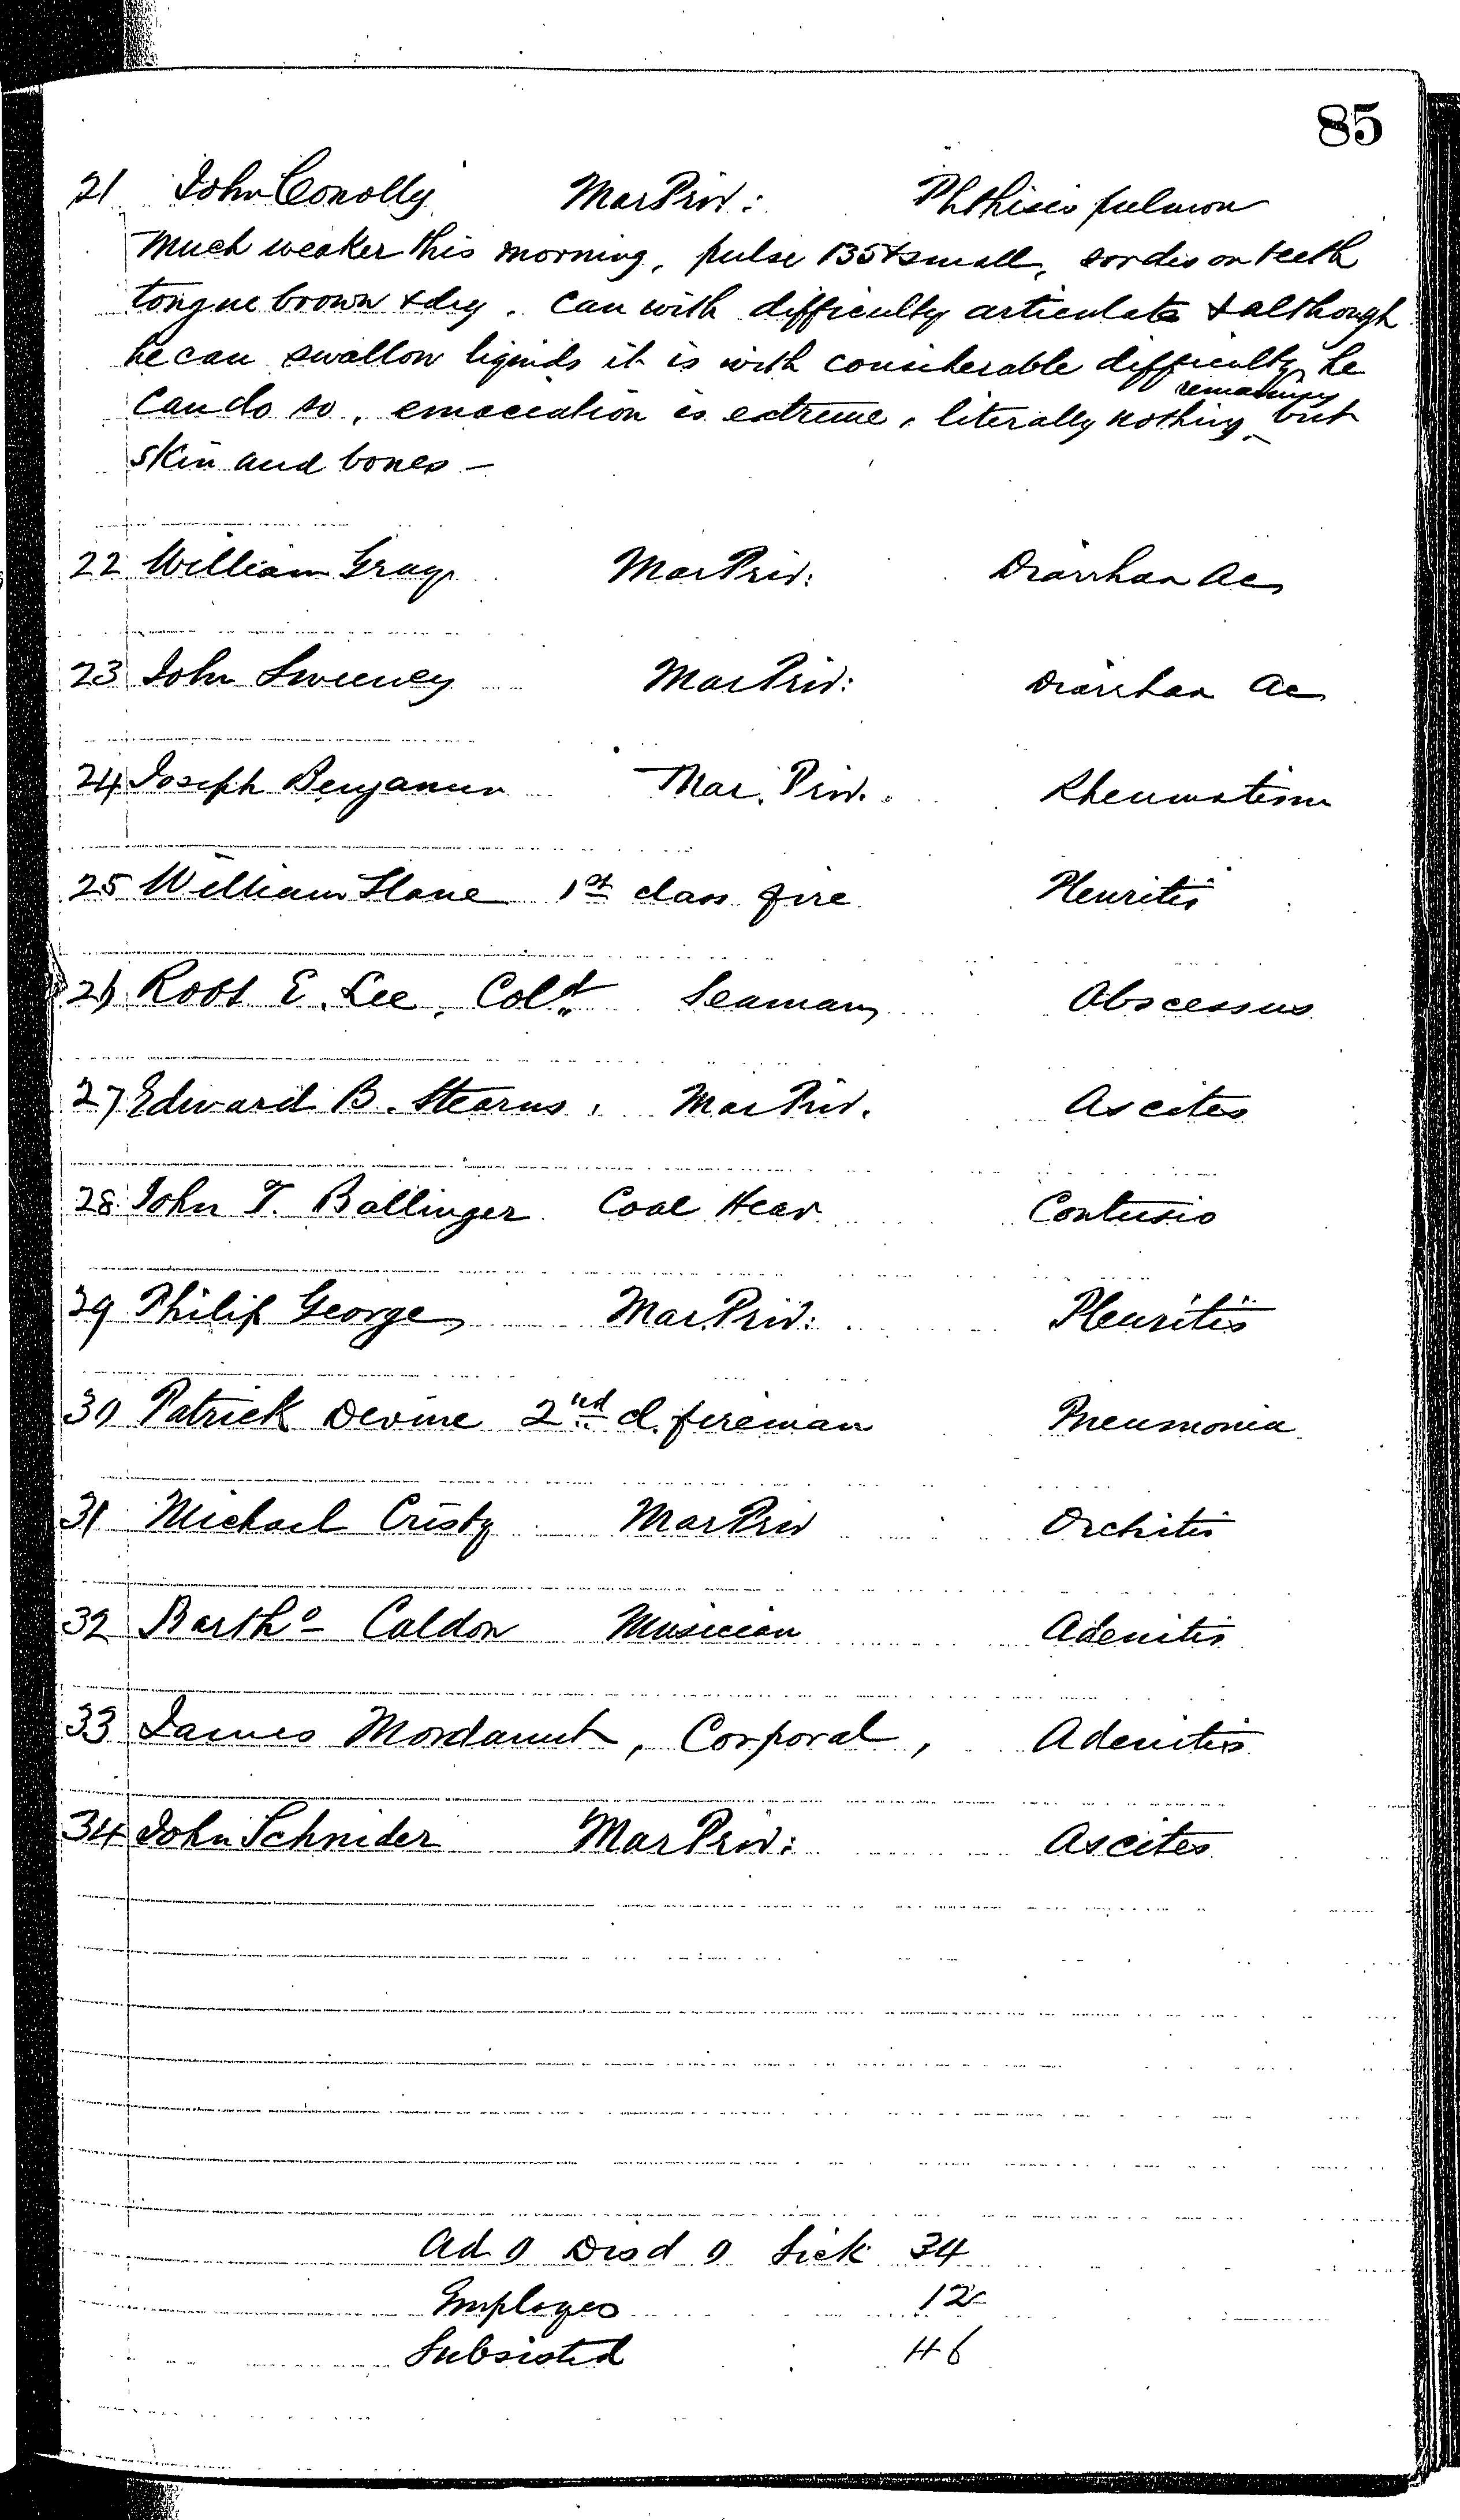 Patients in the Naval Hospital, Washington DC, on November 20, 1866, page 2 of 2, in the Medical Journal, October 1, 1866 to March 20, 1867